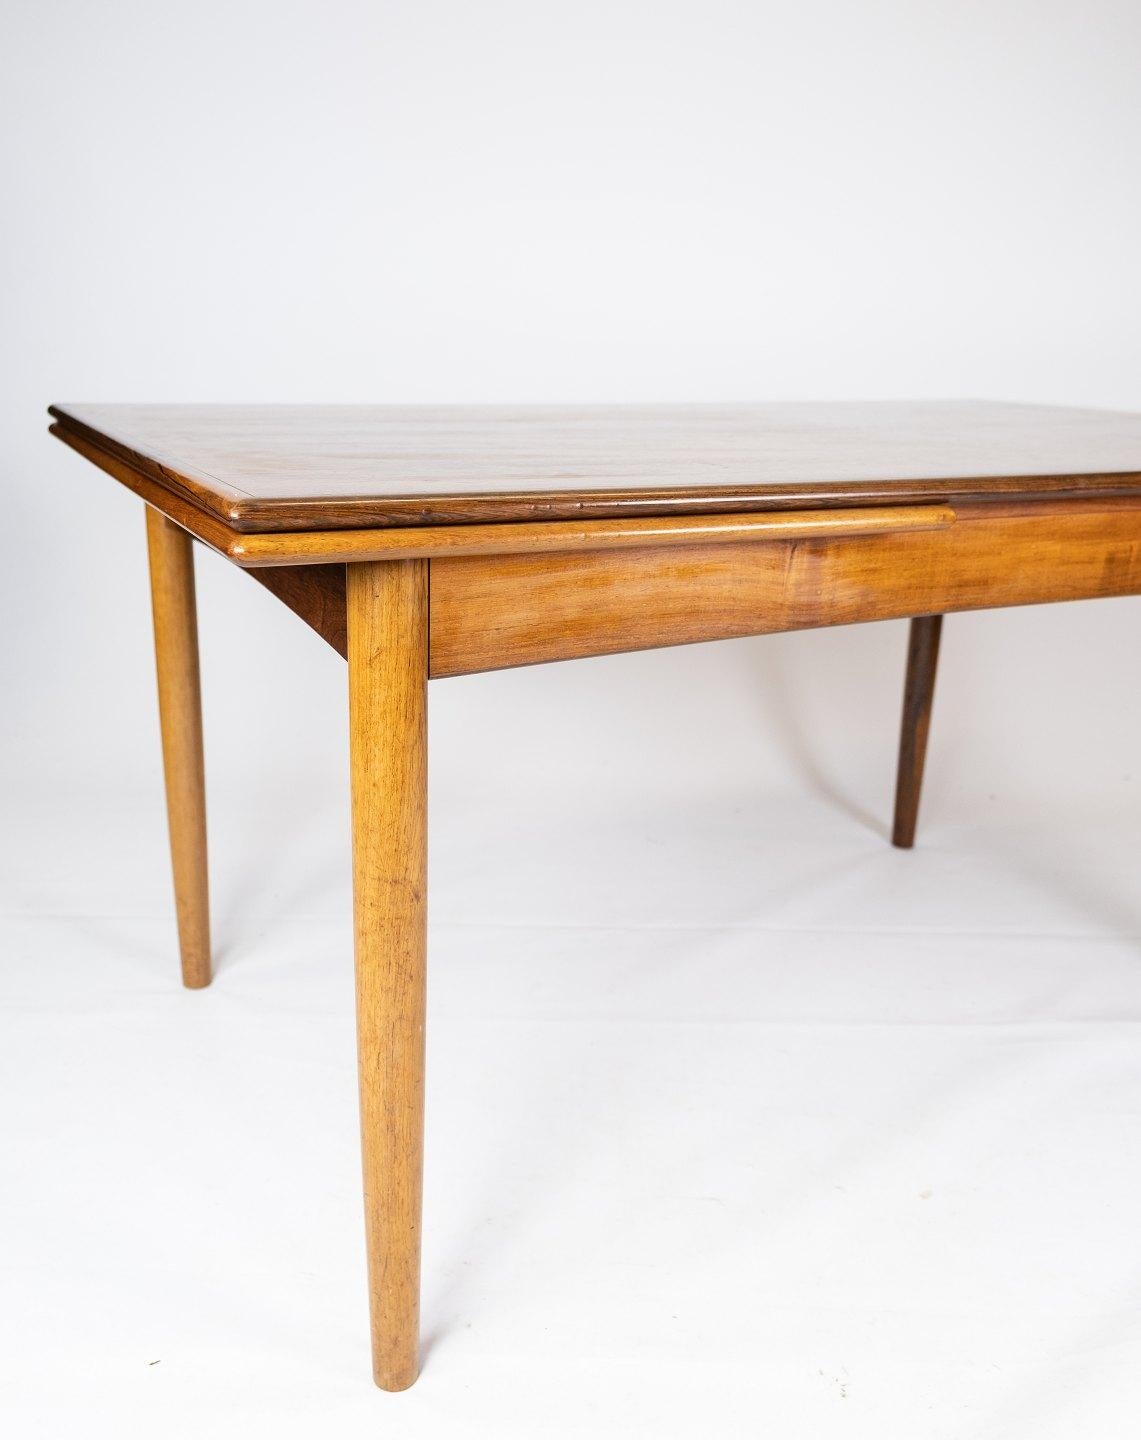 This Danish-designed dining table from the 1960s exudes timeless elegance and functionality. Crafted from luxurious rosewood, it boasts a rich, warm hue and exquisite grain patterns that enhance any dining space.

The table features convenient